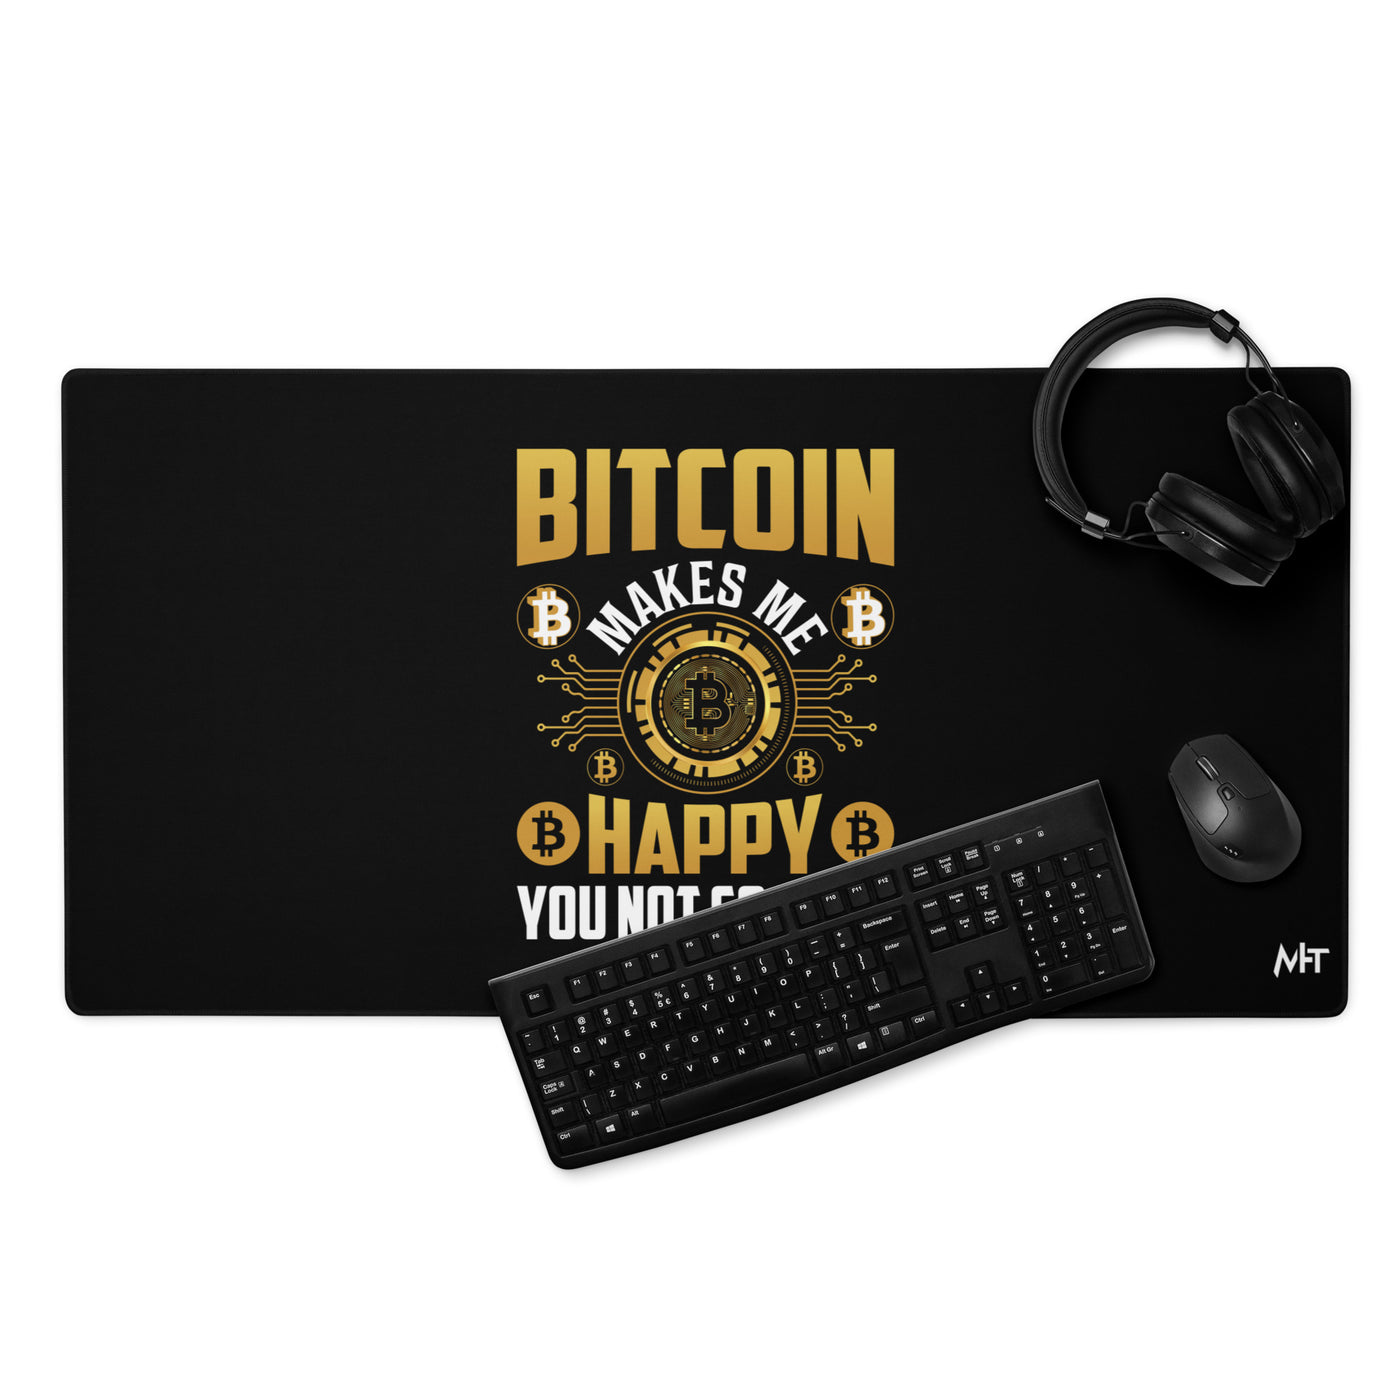 Bitcoin Makes me Happy, you Not so much - Desk Mat